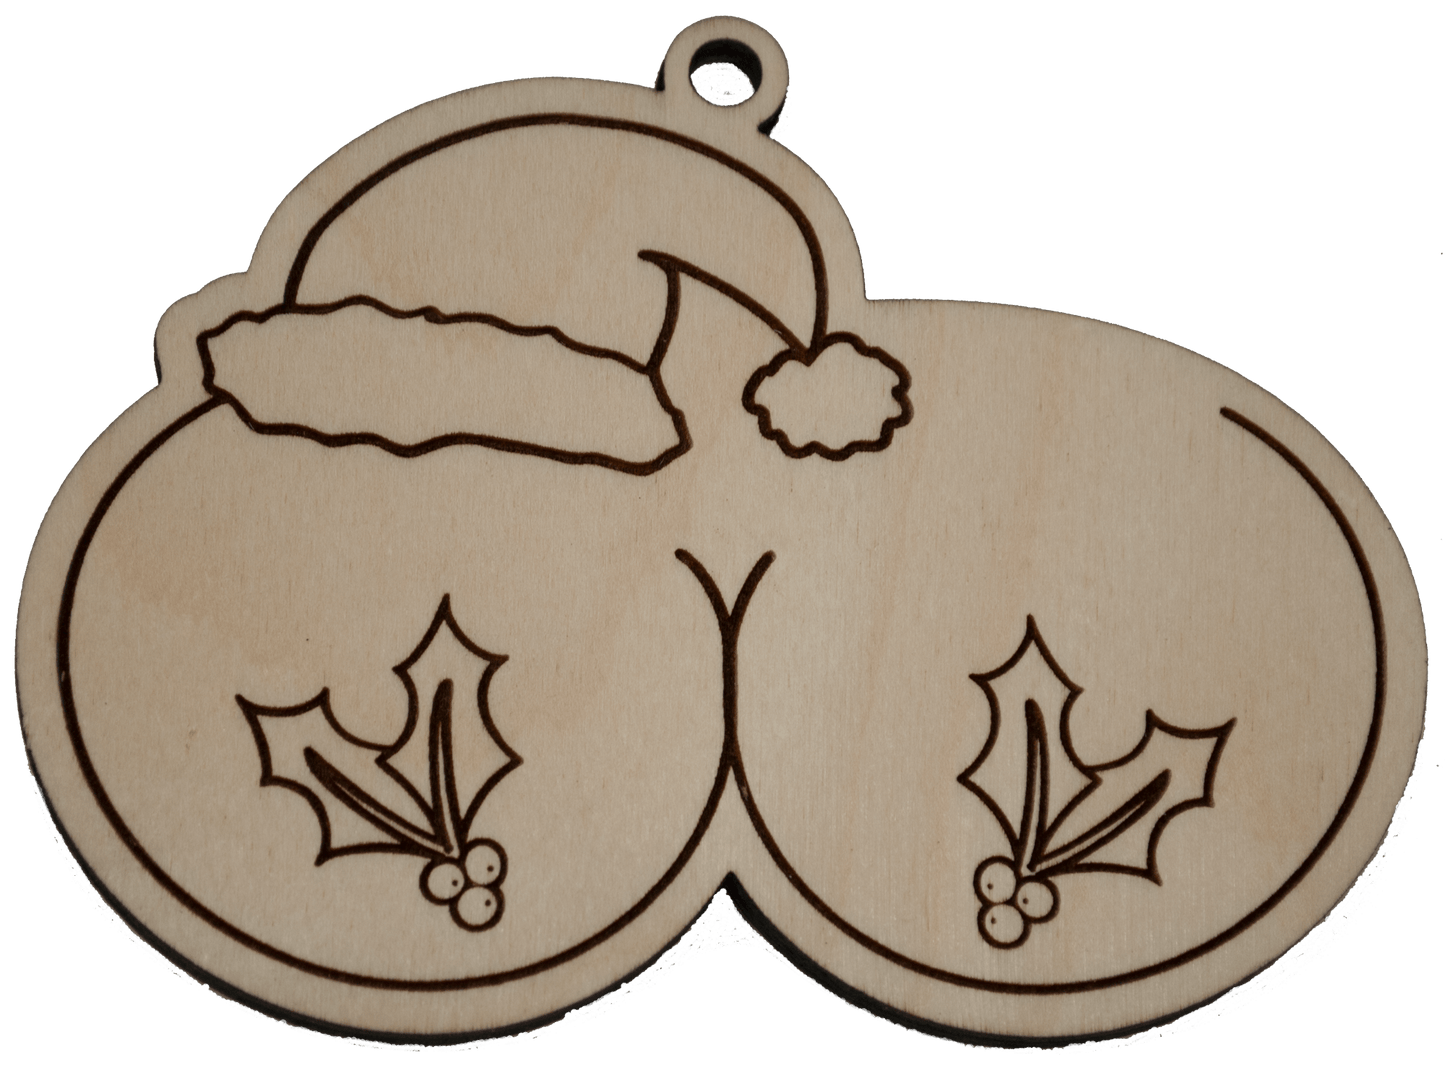 Naughty Christmas Ornament - The Girls and Holly - Bucktooth Designs